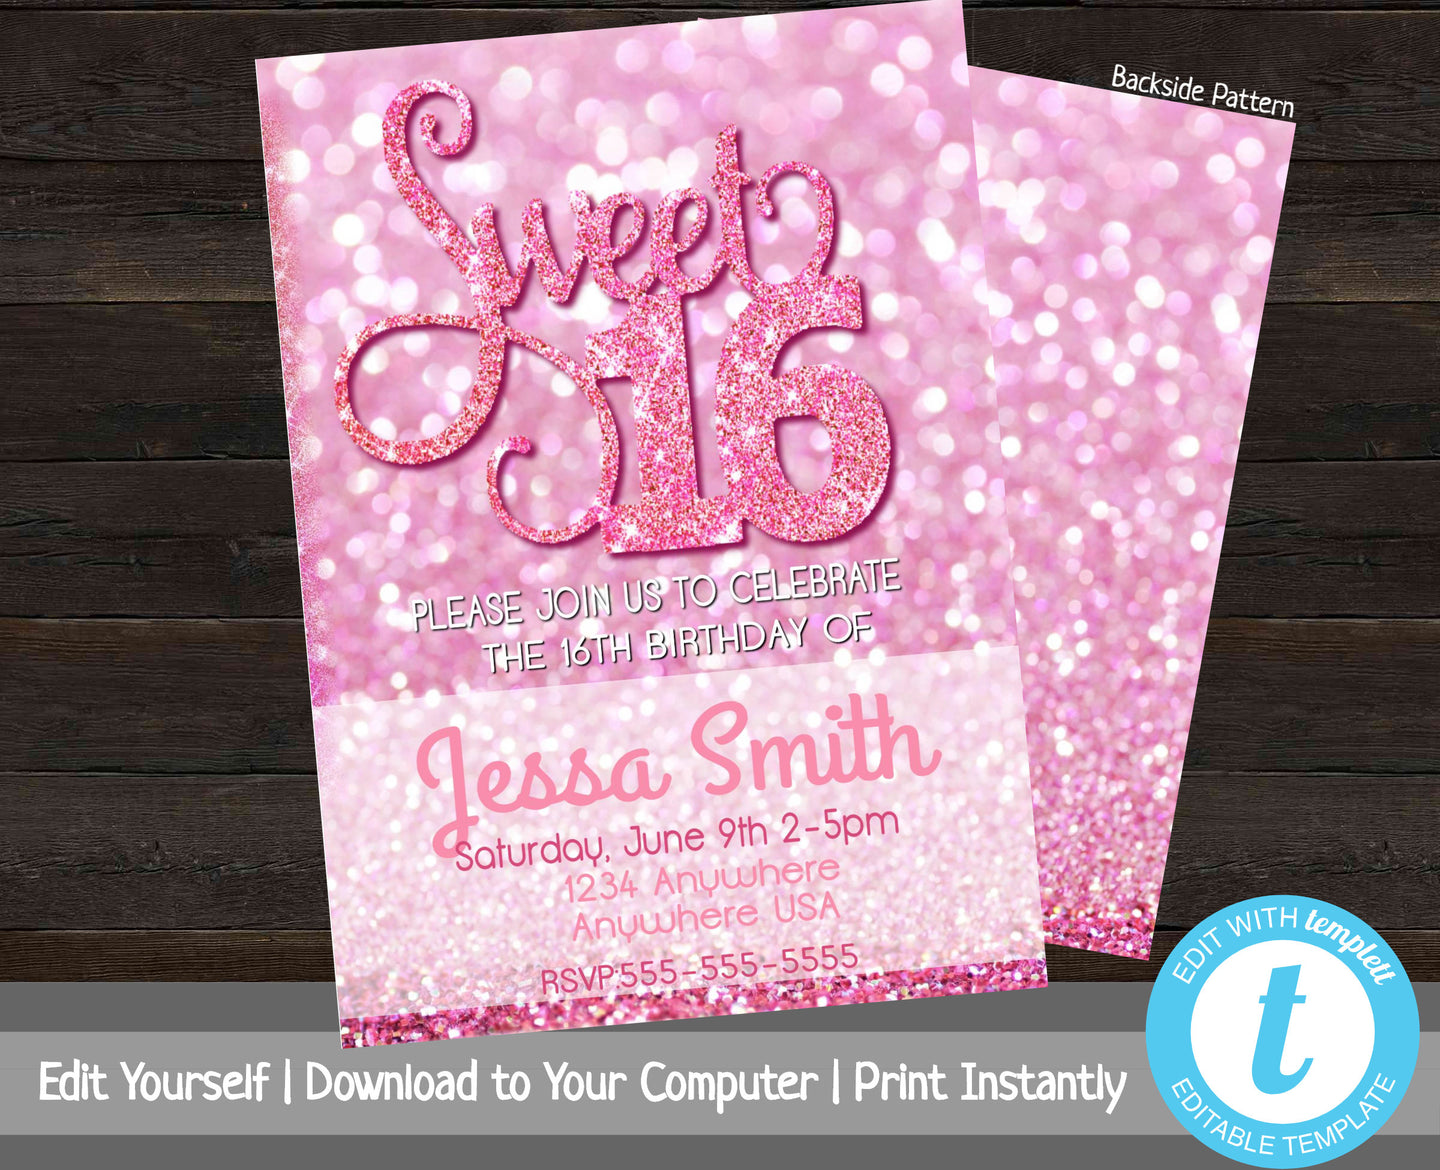 Glitter Sweet 16 Party Invitation, Printable Birthday Invitation Template, Sweet Sixteen Party Invite, Pink Birthday Invitation, Bday Invite